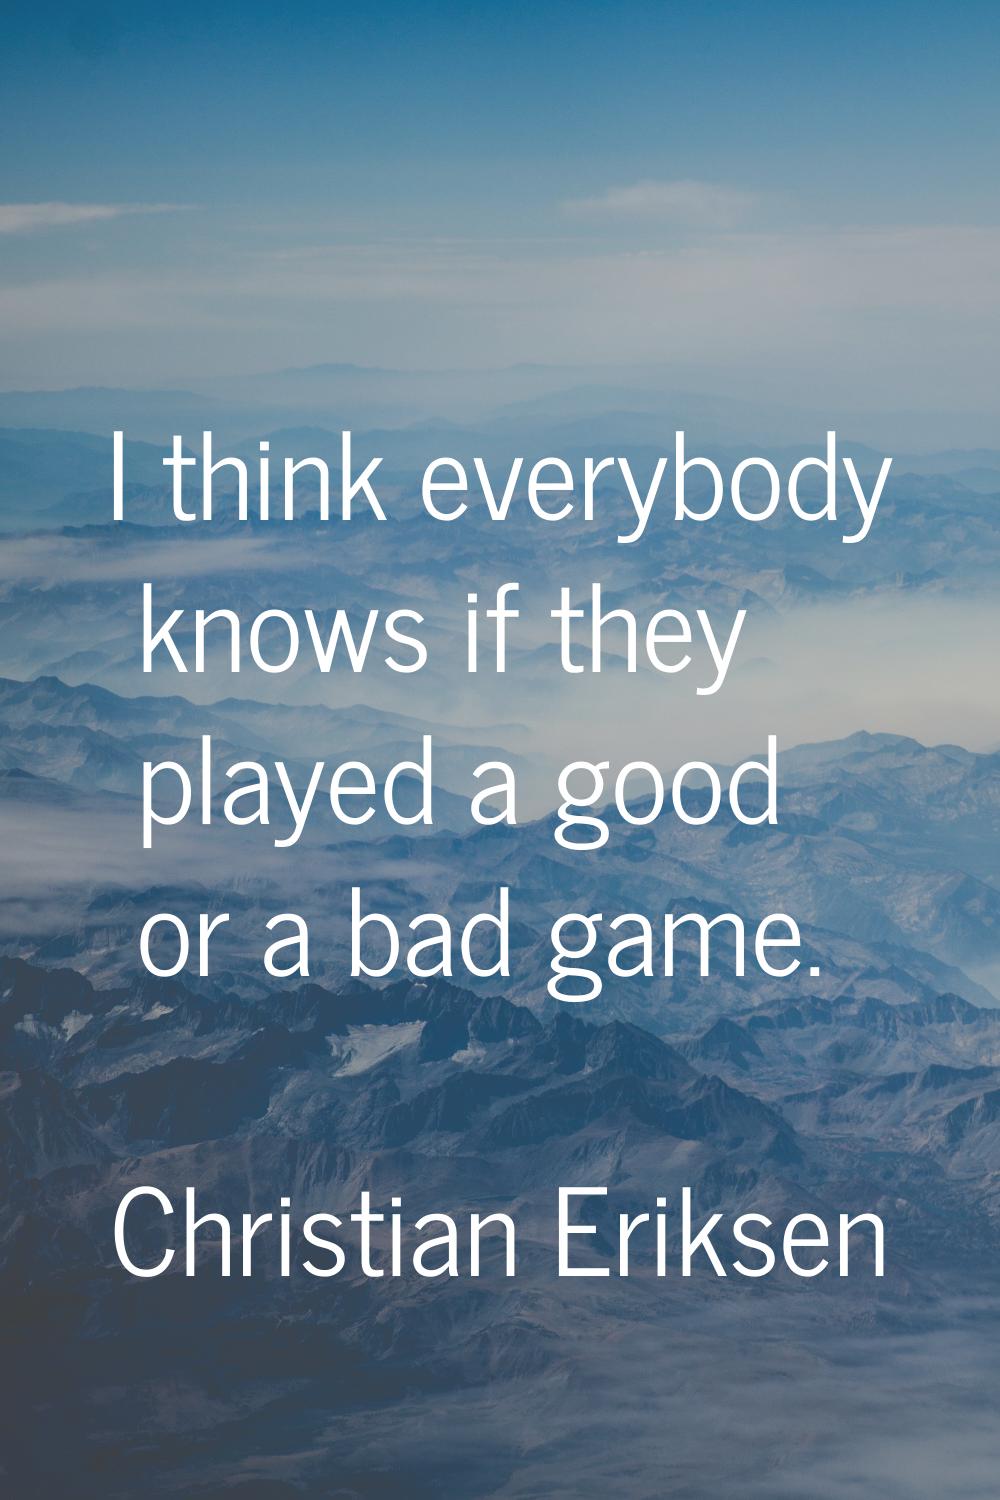 I think everybody knows if they played a good or a bad game.